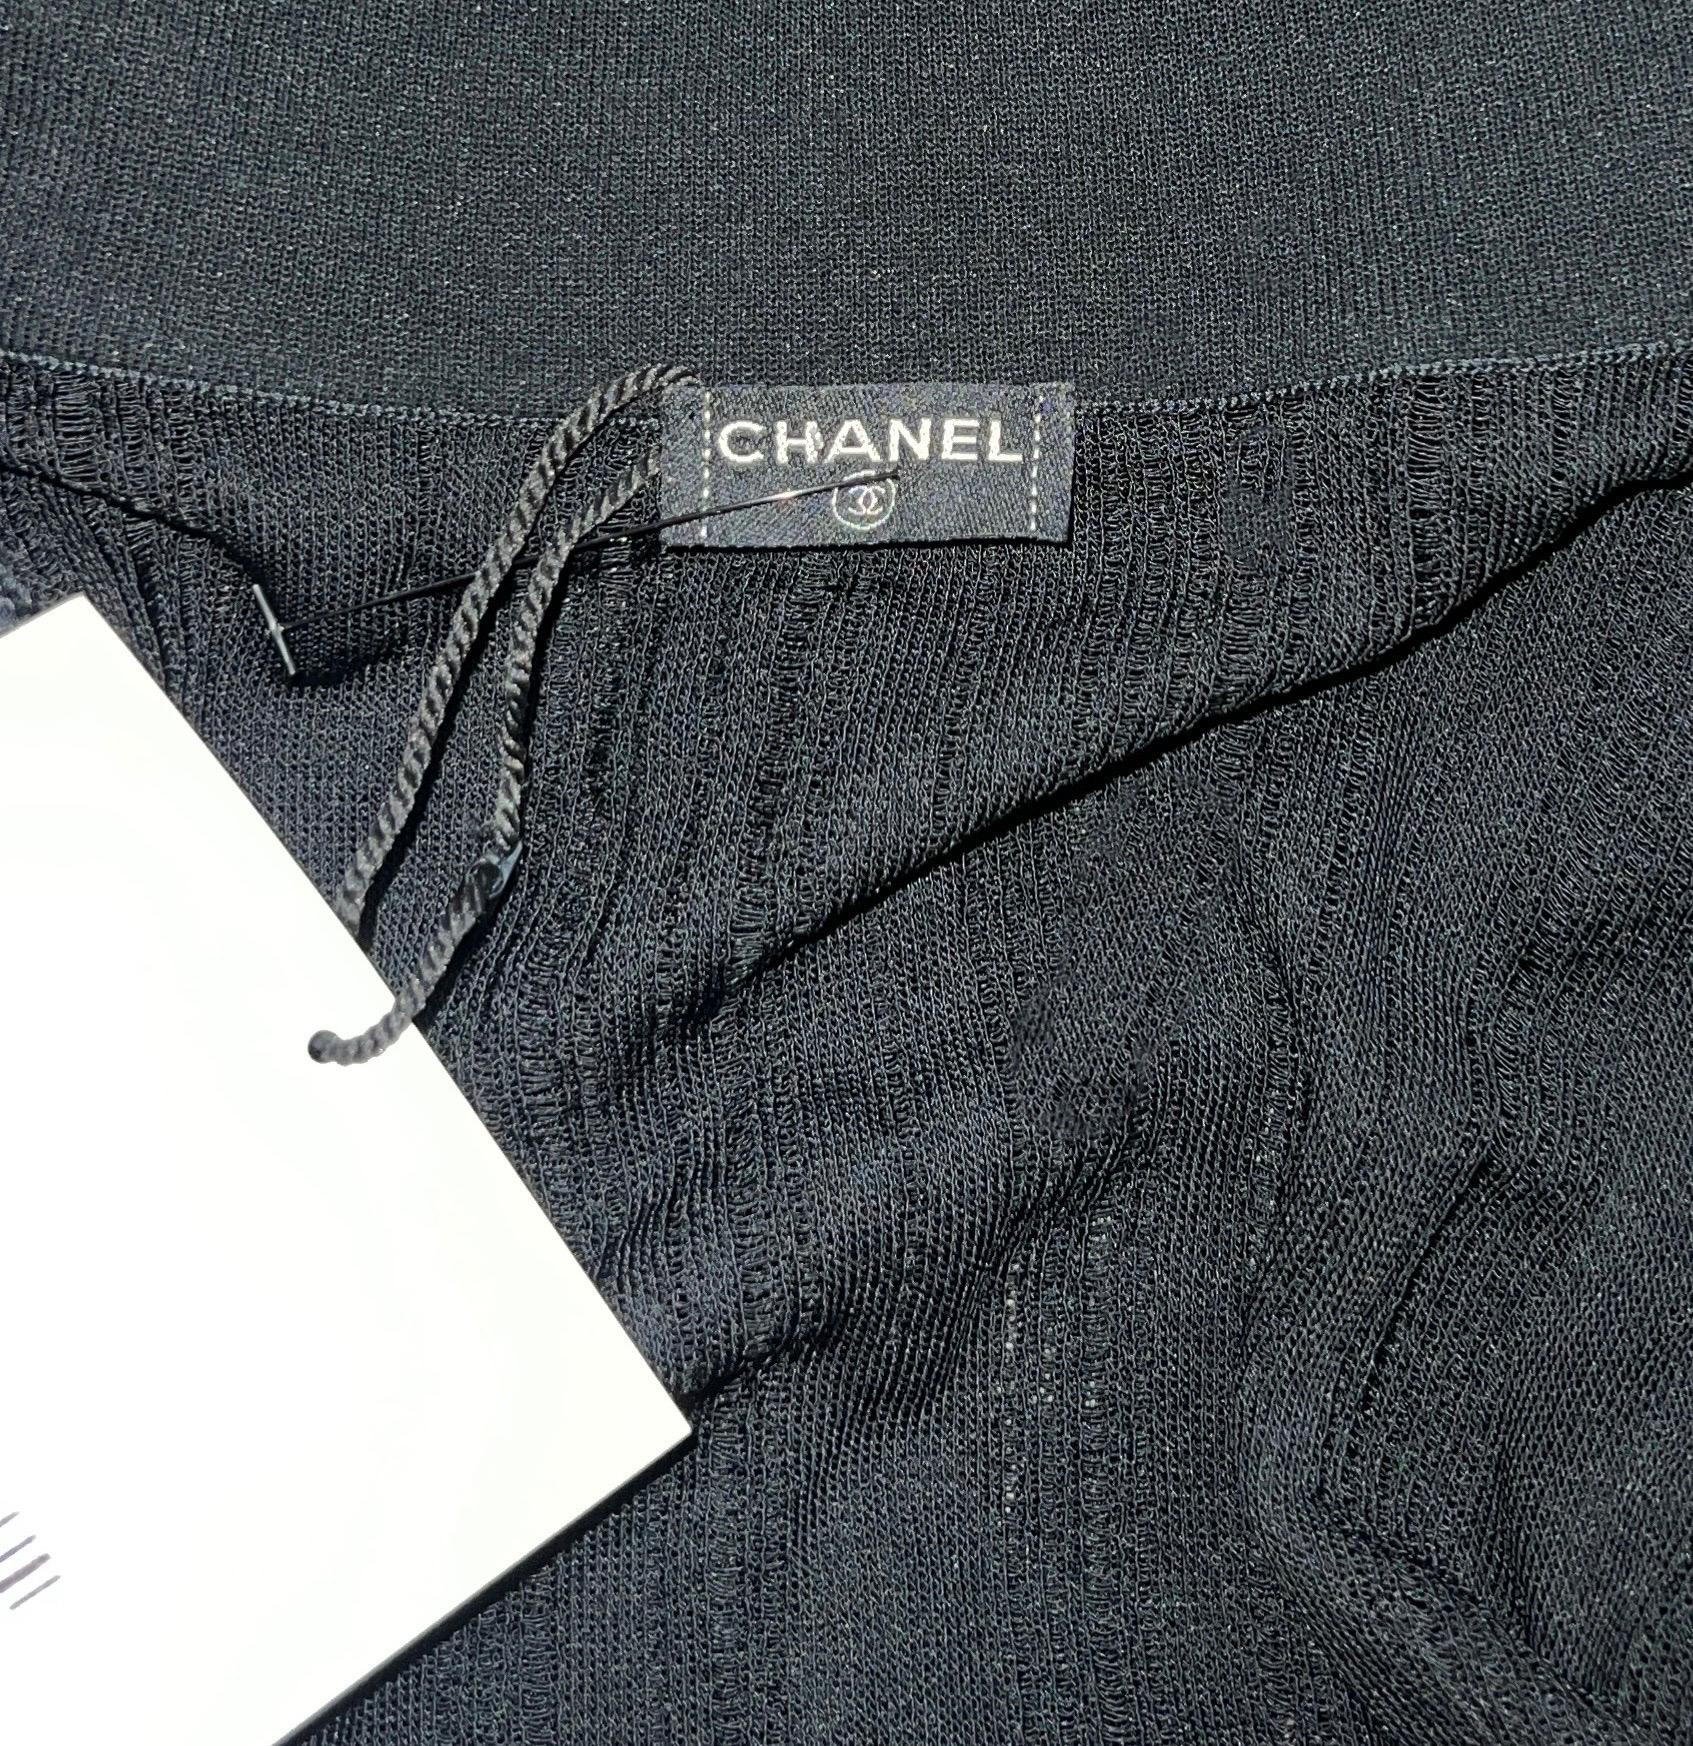 CHANEL Black Knit Jacket Cardigan with Vinyl Trimmings 40 For Sale 2